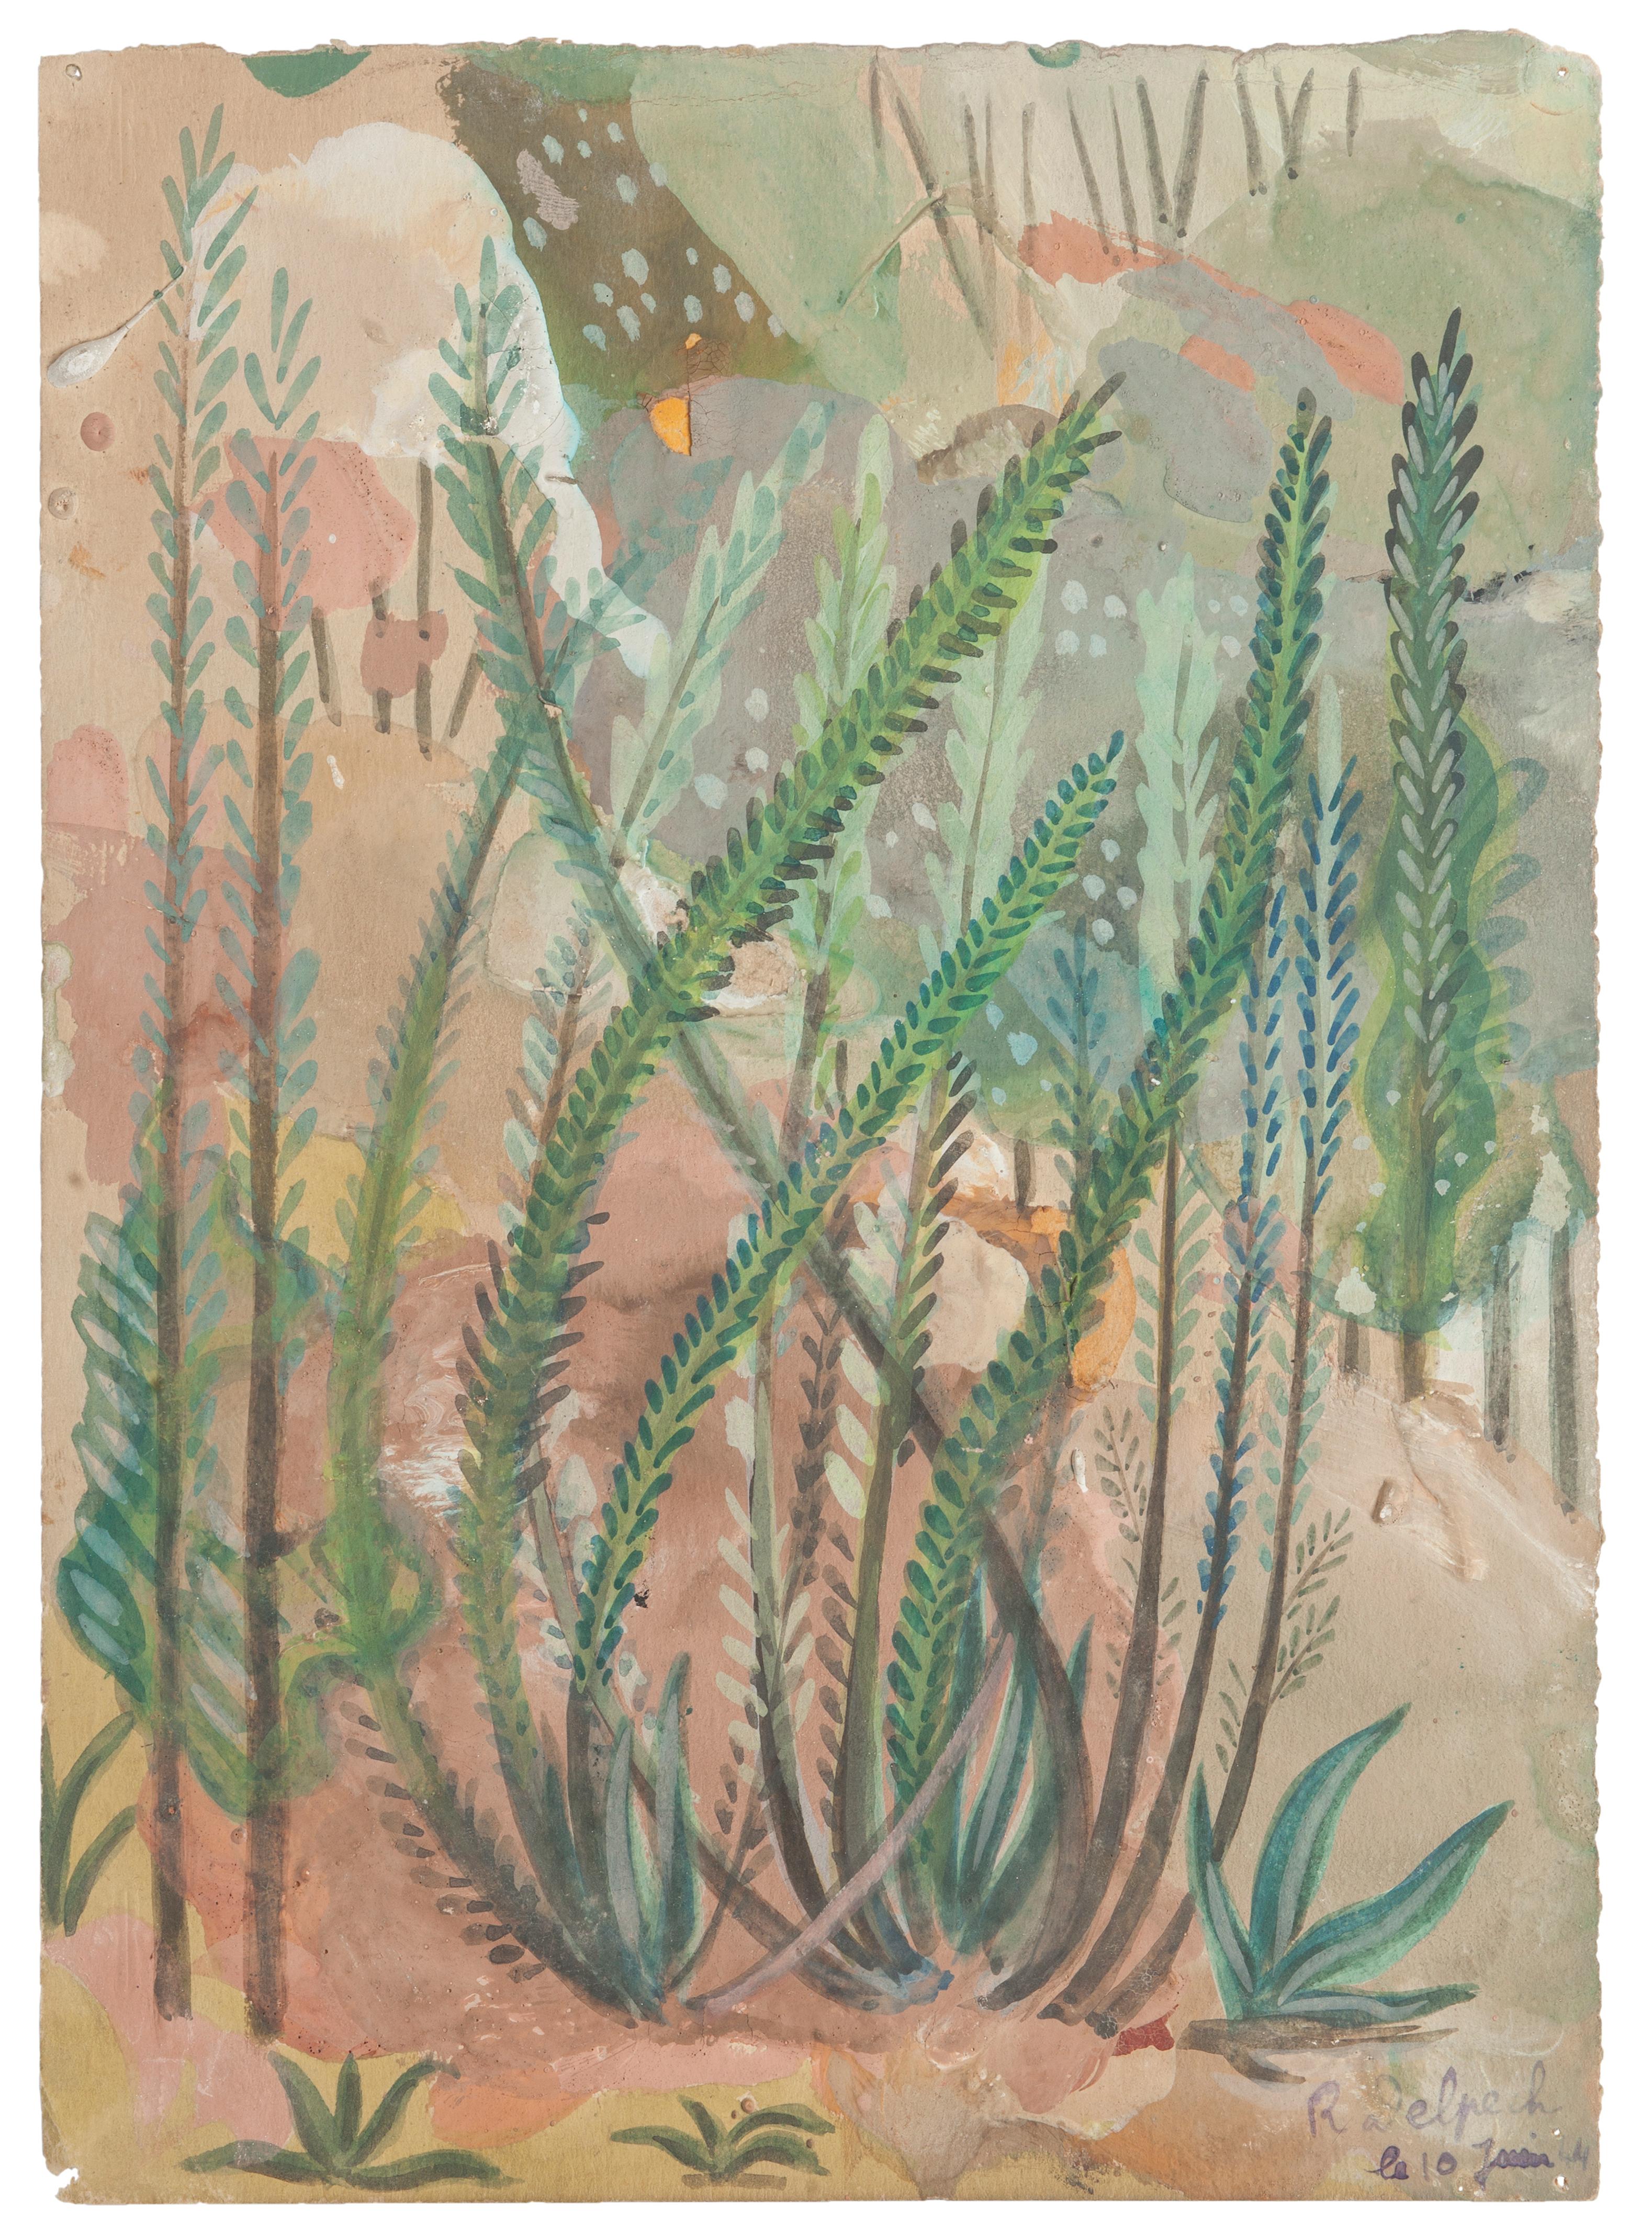 "Vegetation" is an original drawing in watercolor on paper, realized by Jean Delpech (1916-1988). 
The state of preservation of the artwork is very good.

Sheet dimension: 26.3 x 17 cm.

The artwork represents beautiful landscape with vivid color,